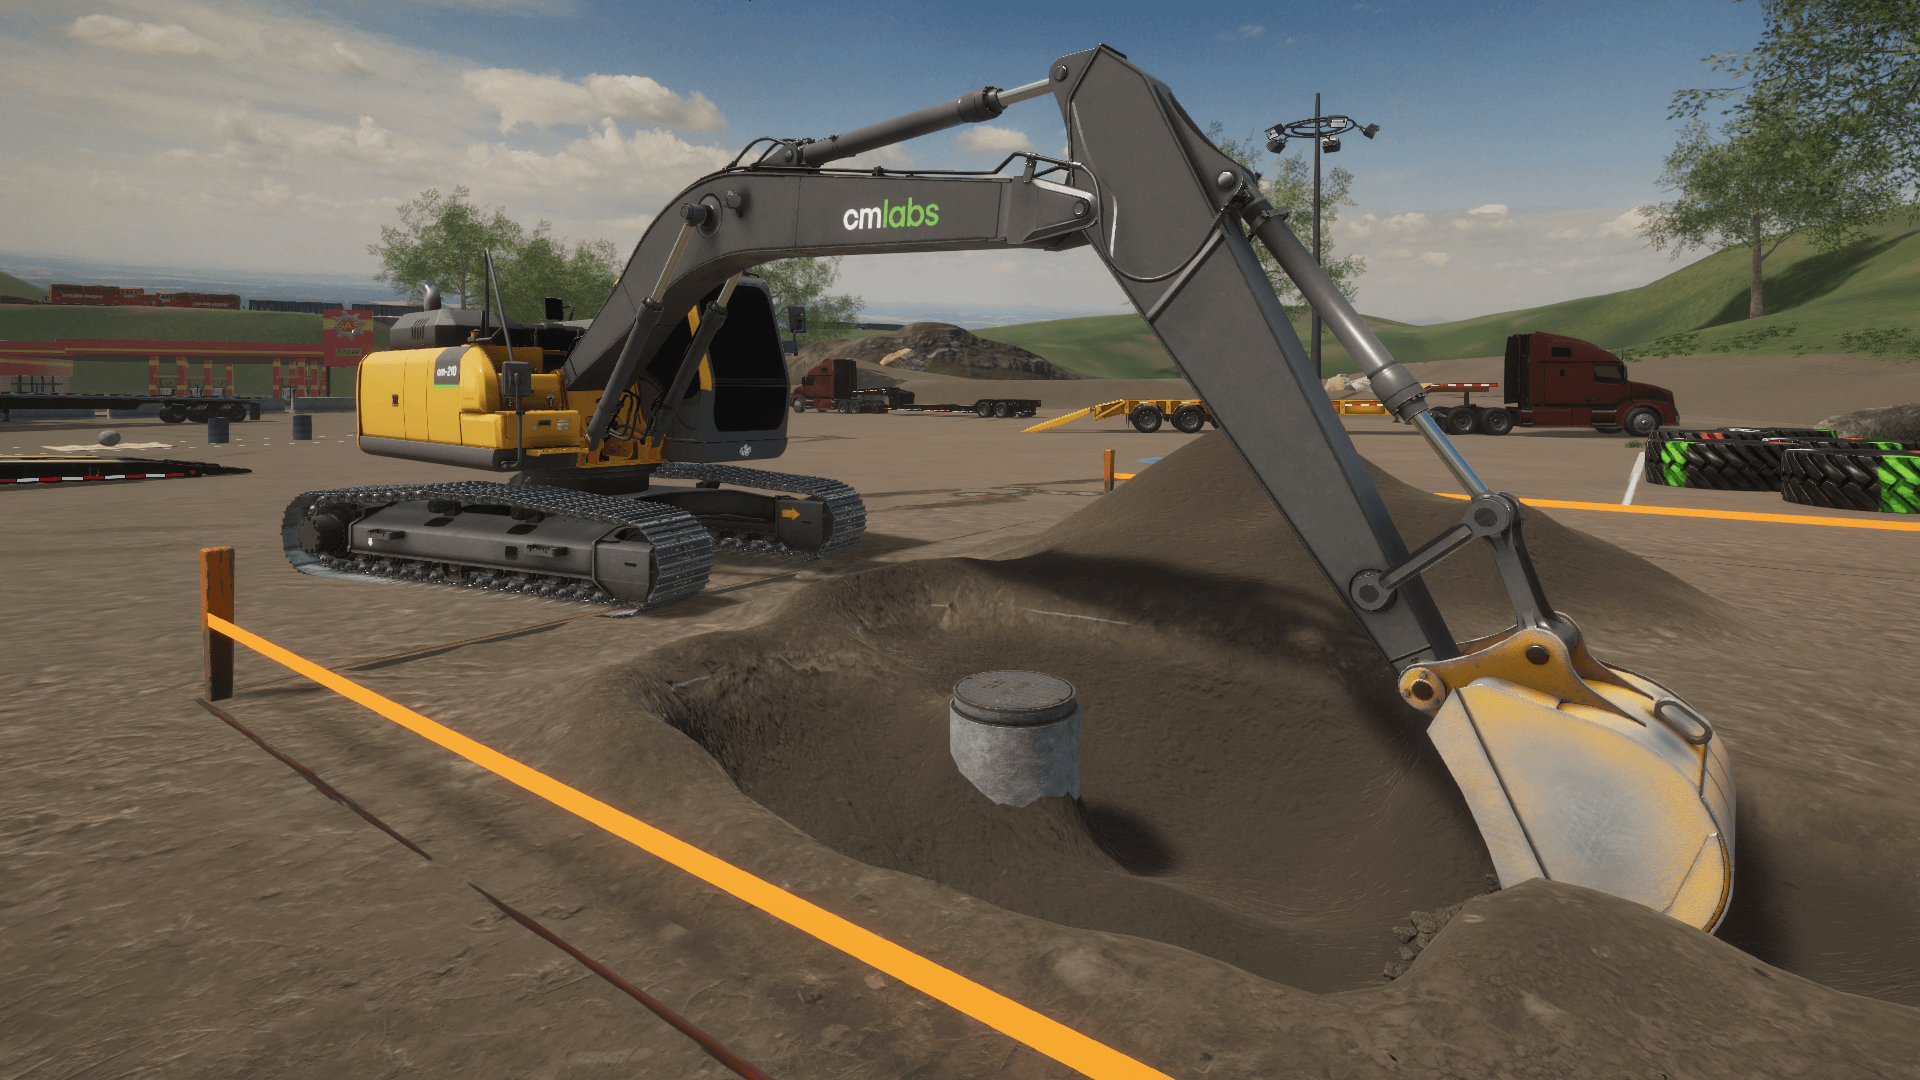 Excavator-simulator-training-excercise-Man-Hole-Covering-1.png